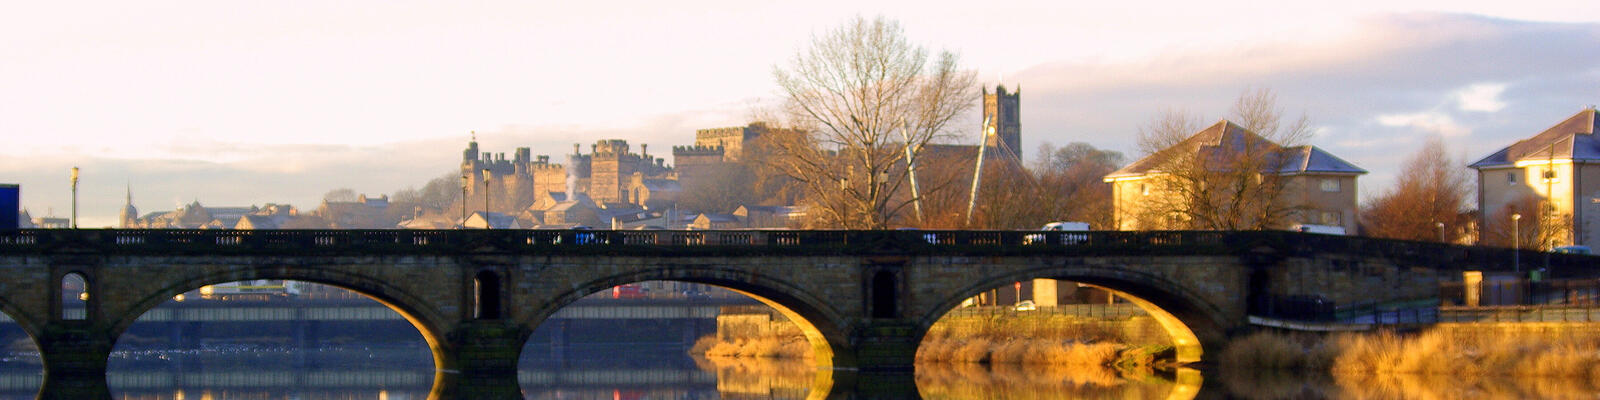 A long shot of Lancaster in the sunshine with a bridge in the foreground.